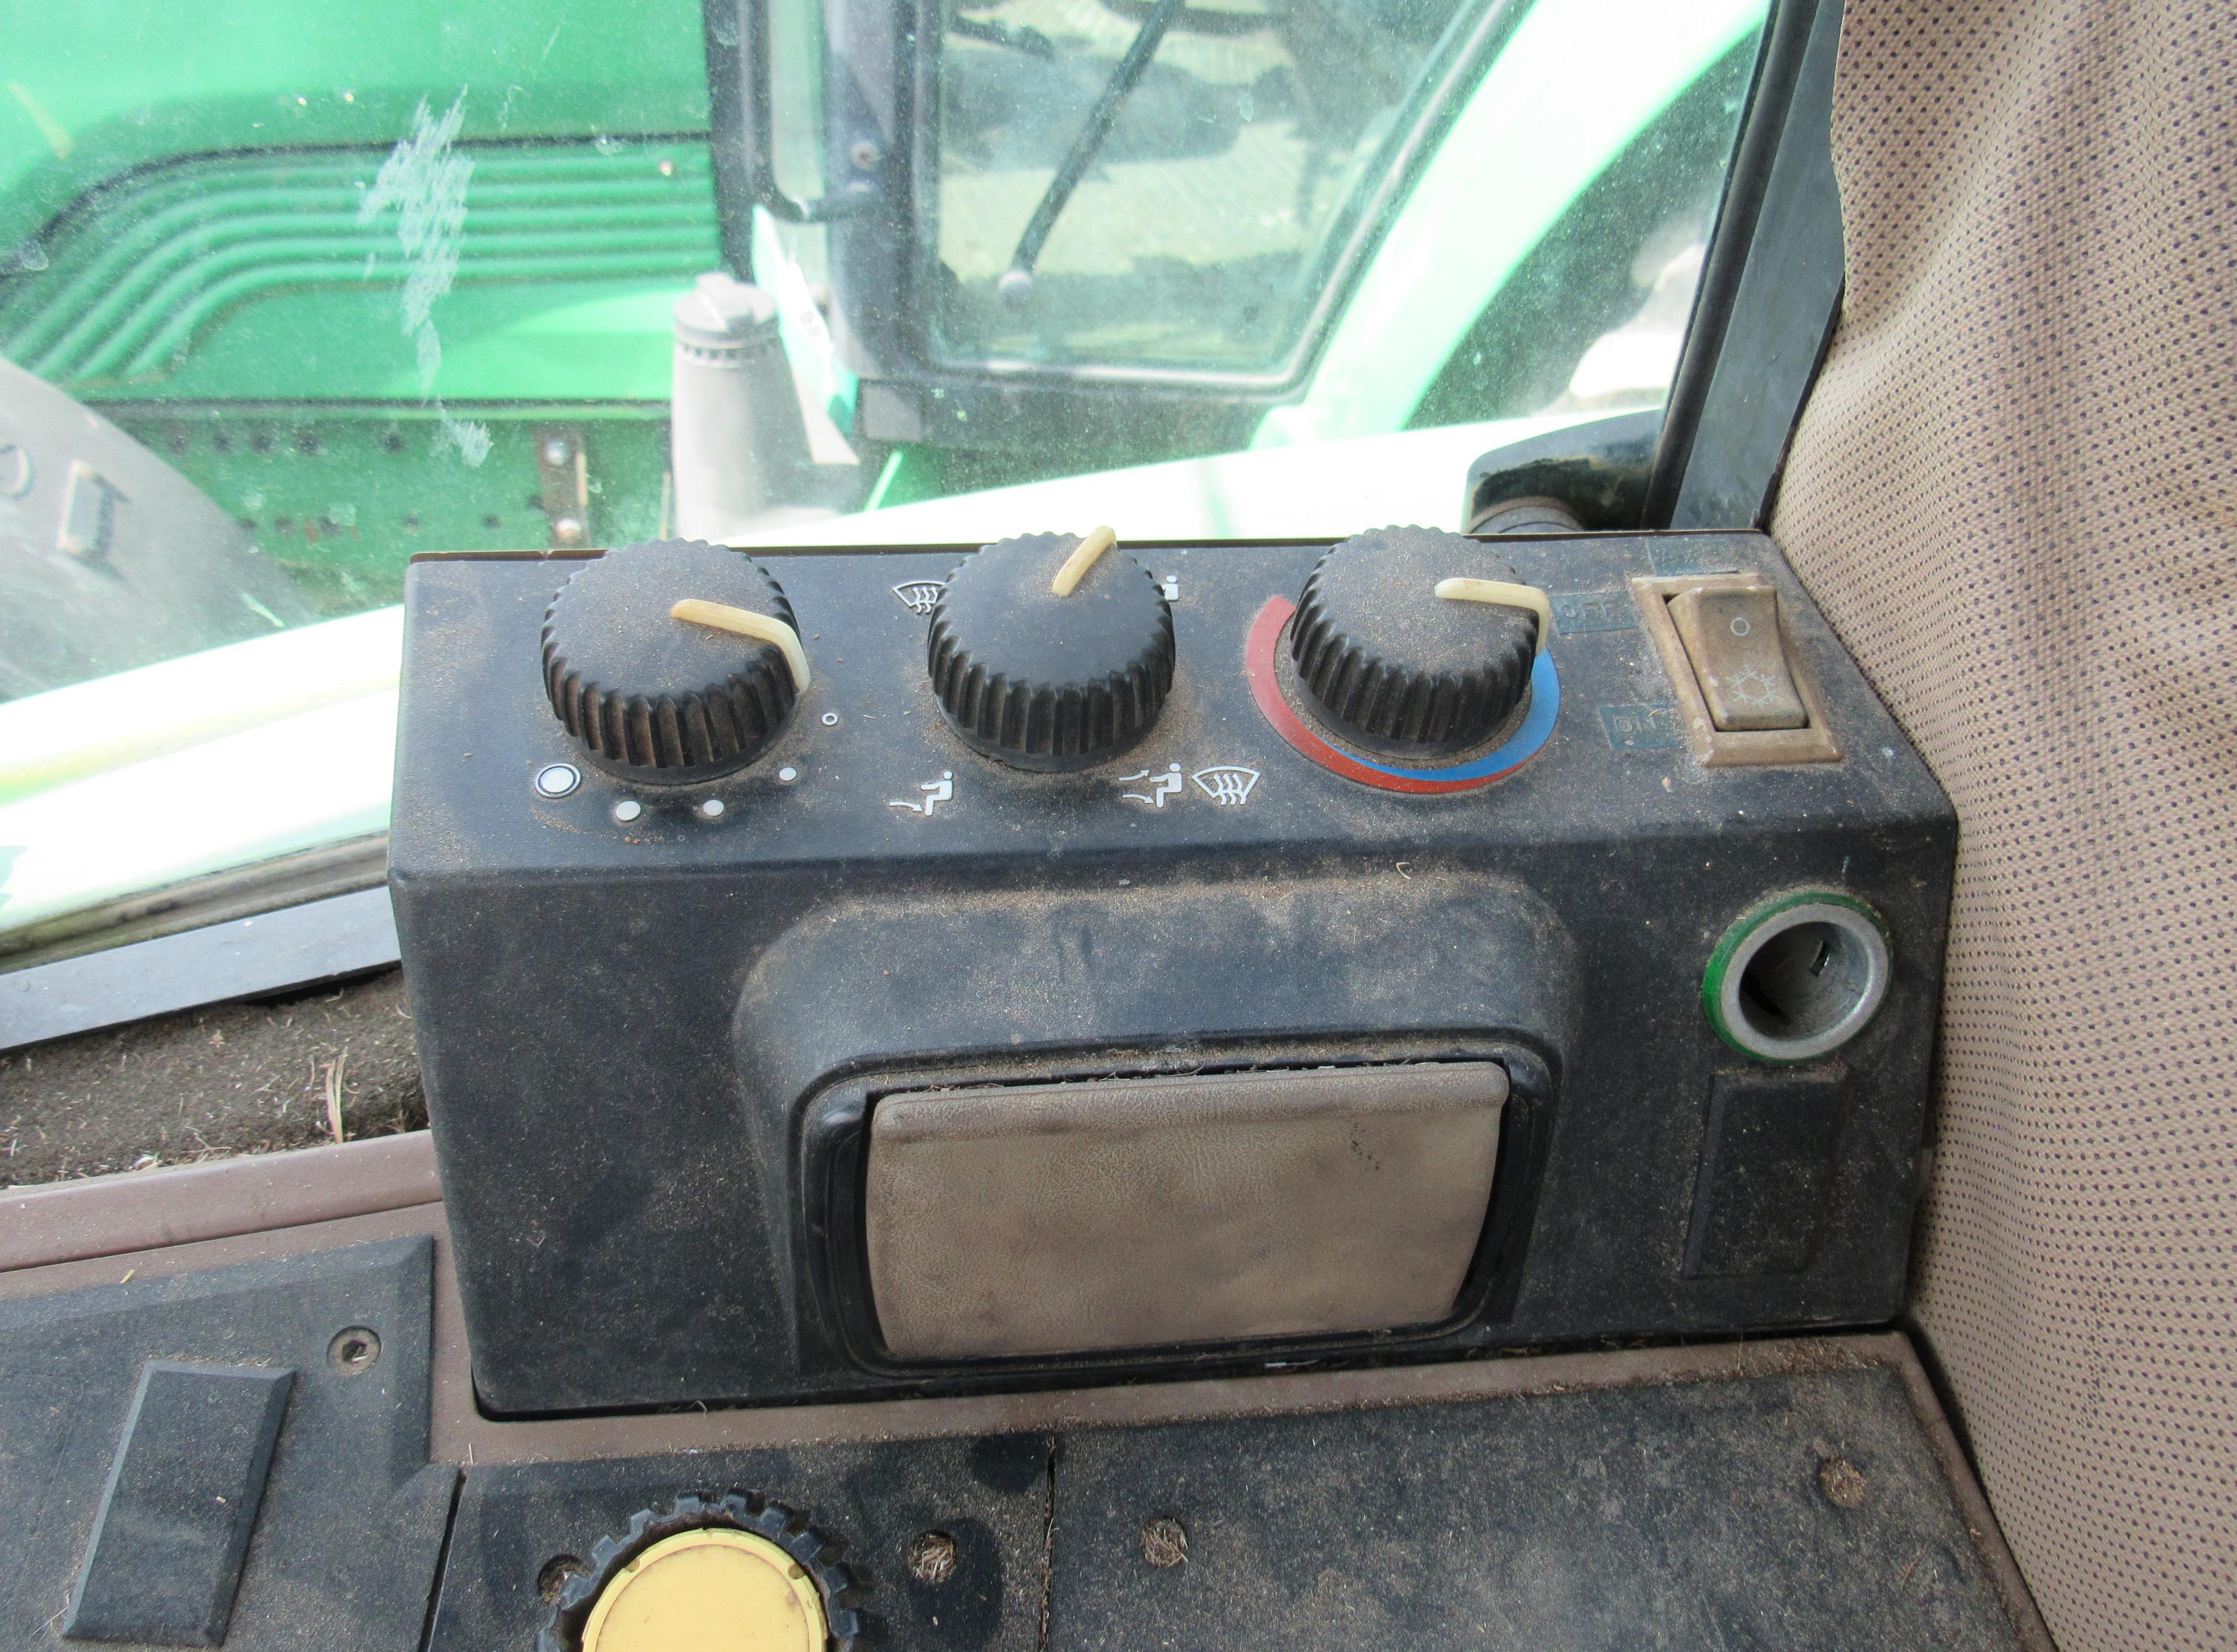 JD 6300 Cab Tractor